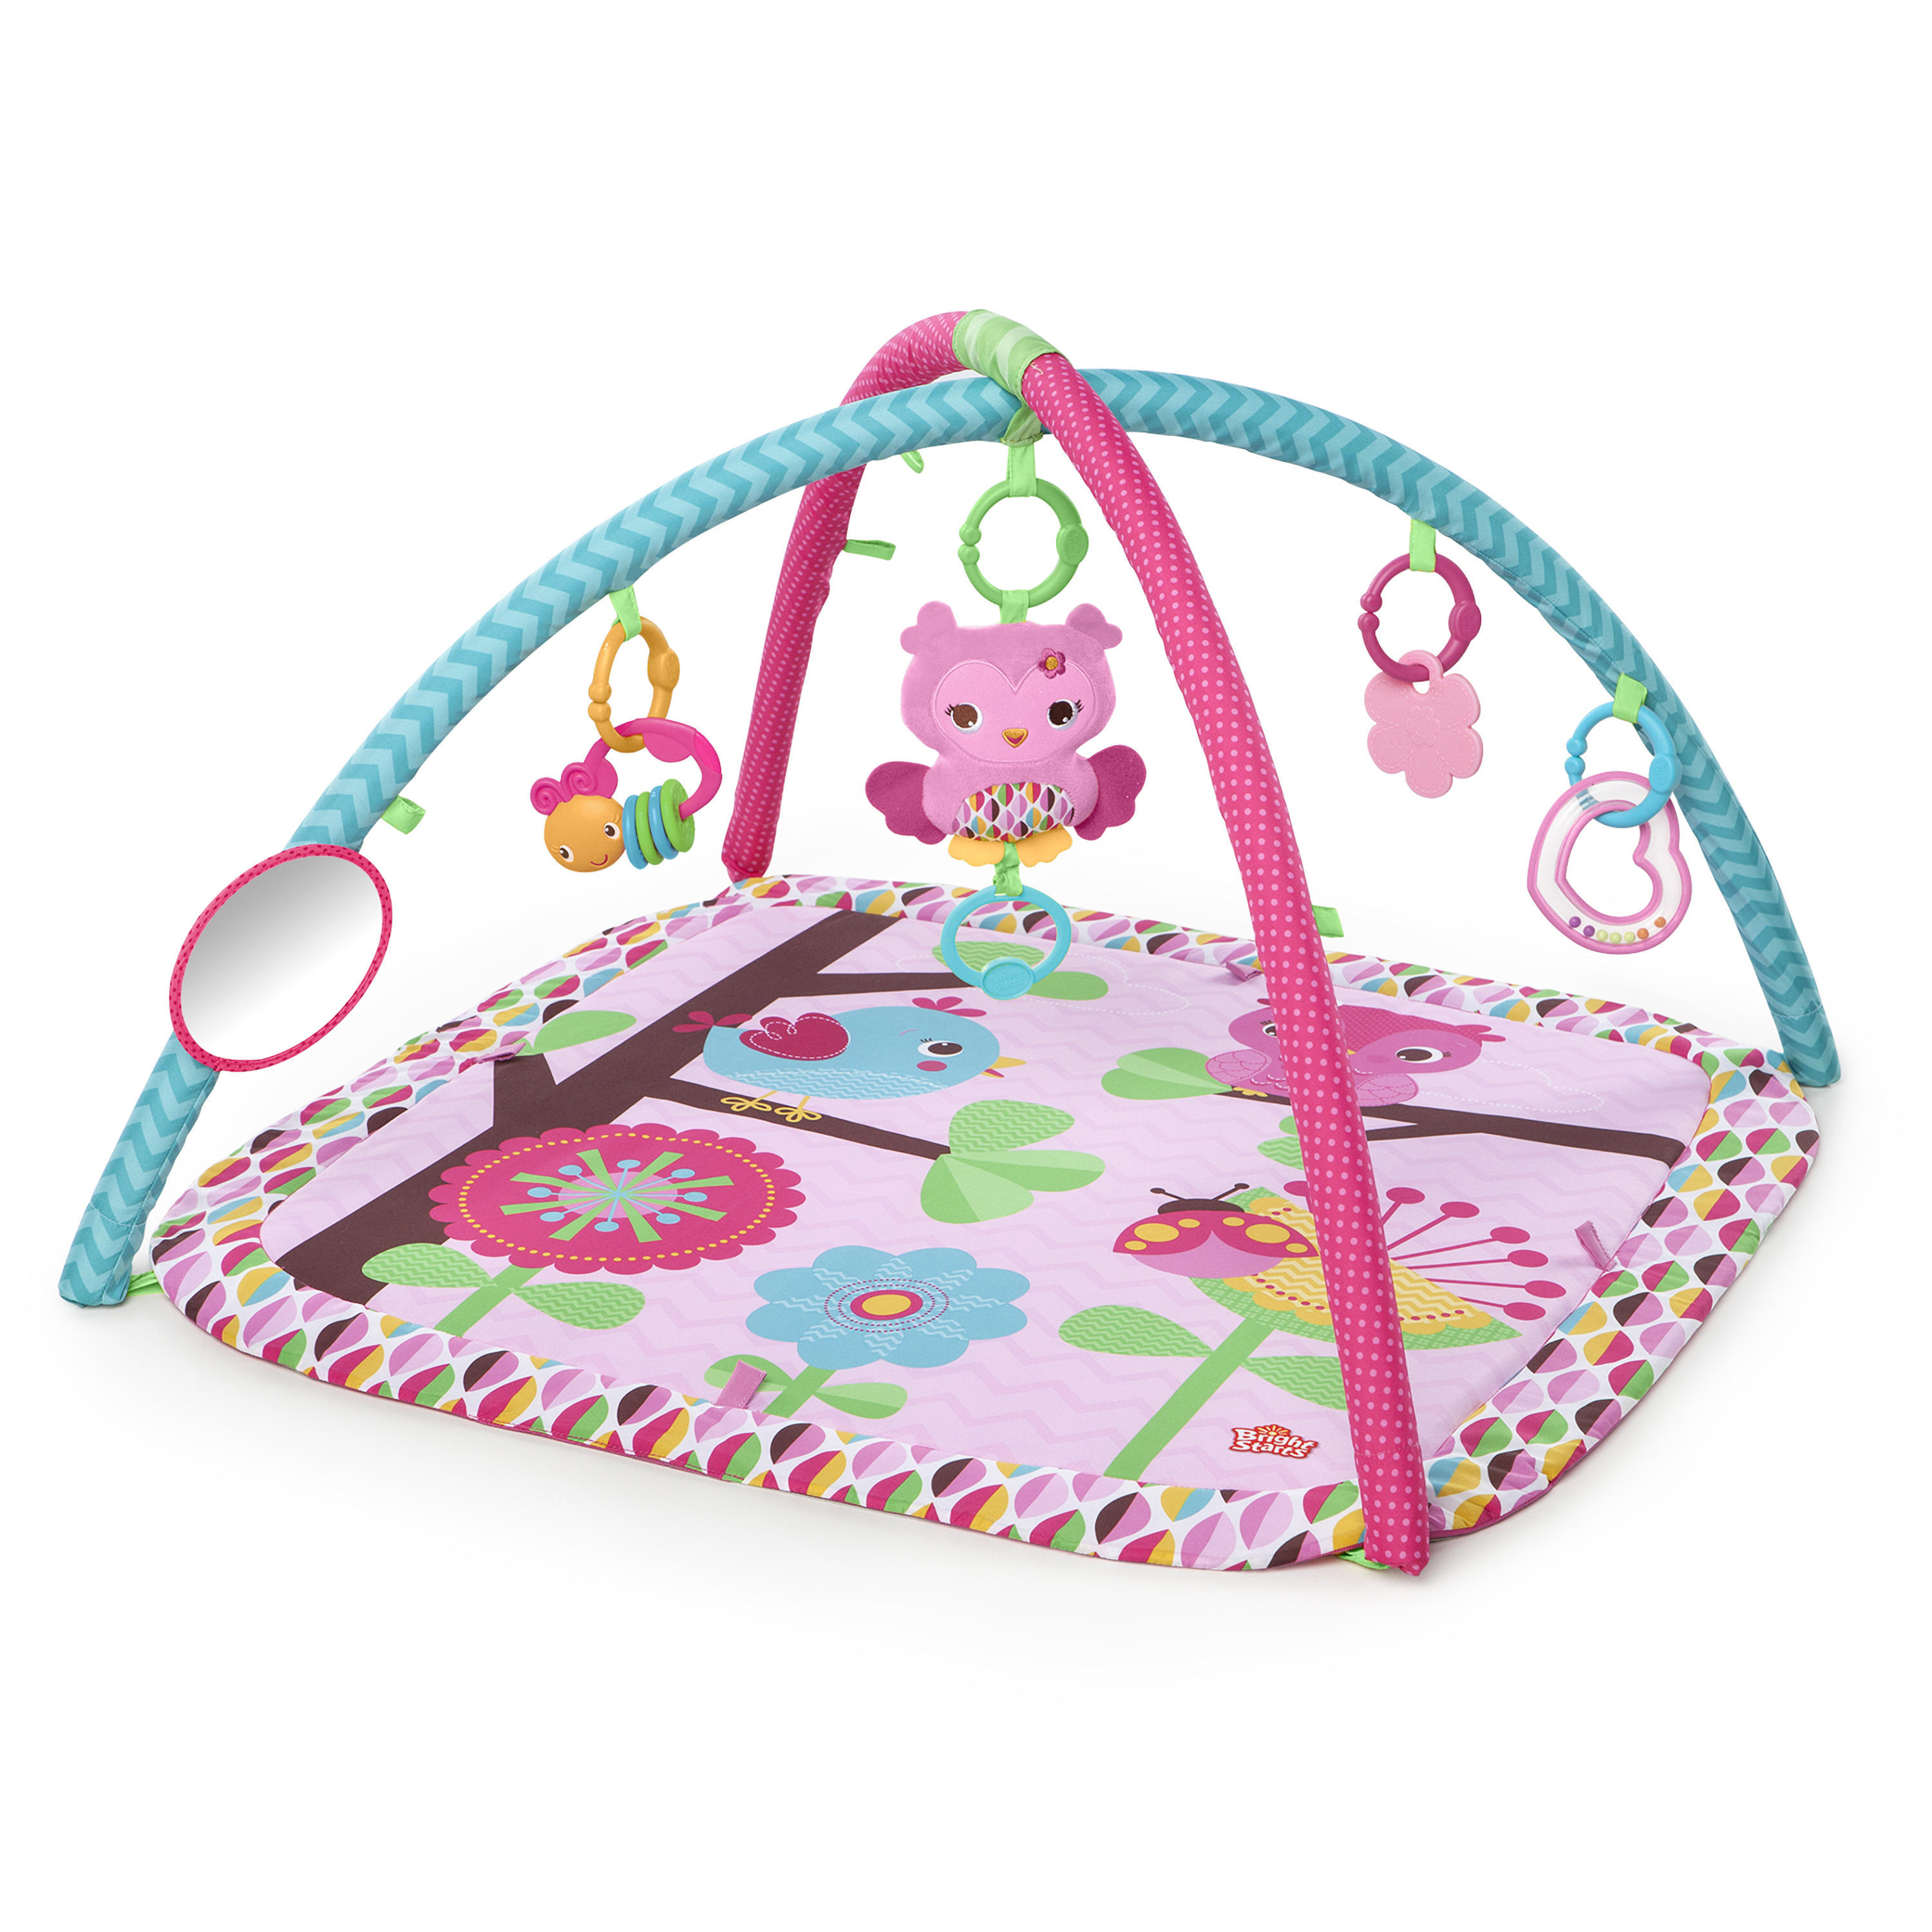 Bright Starts Charming Chirps Activity Gym and Play Mat with Take-Along Toys, Ages Newborn + - image 1 of 12